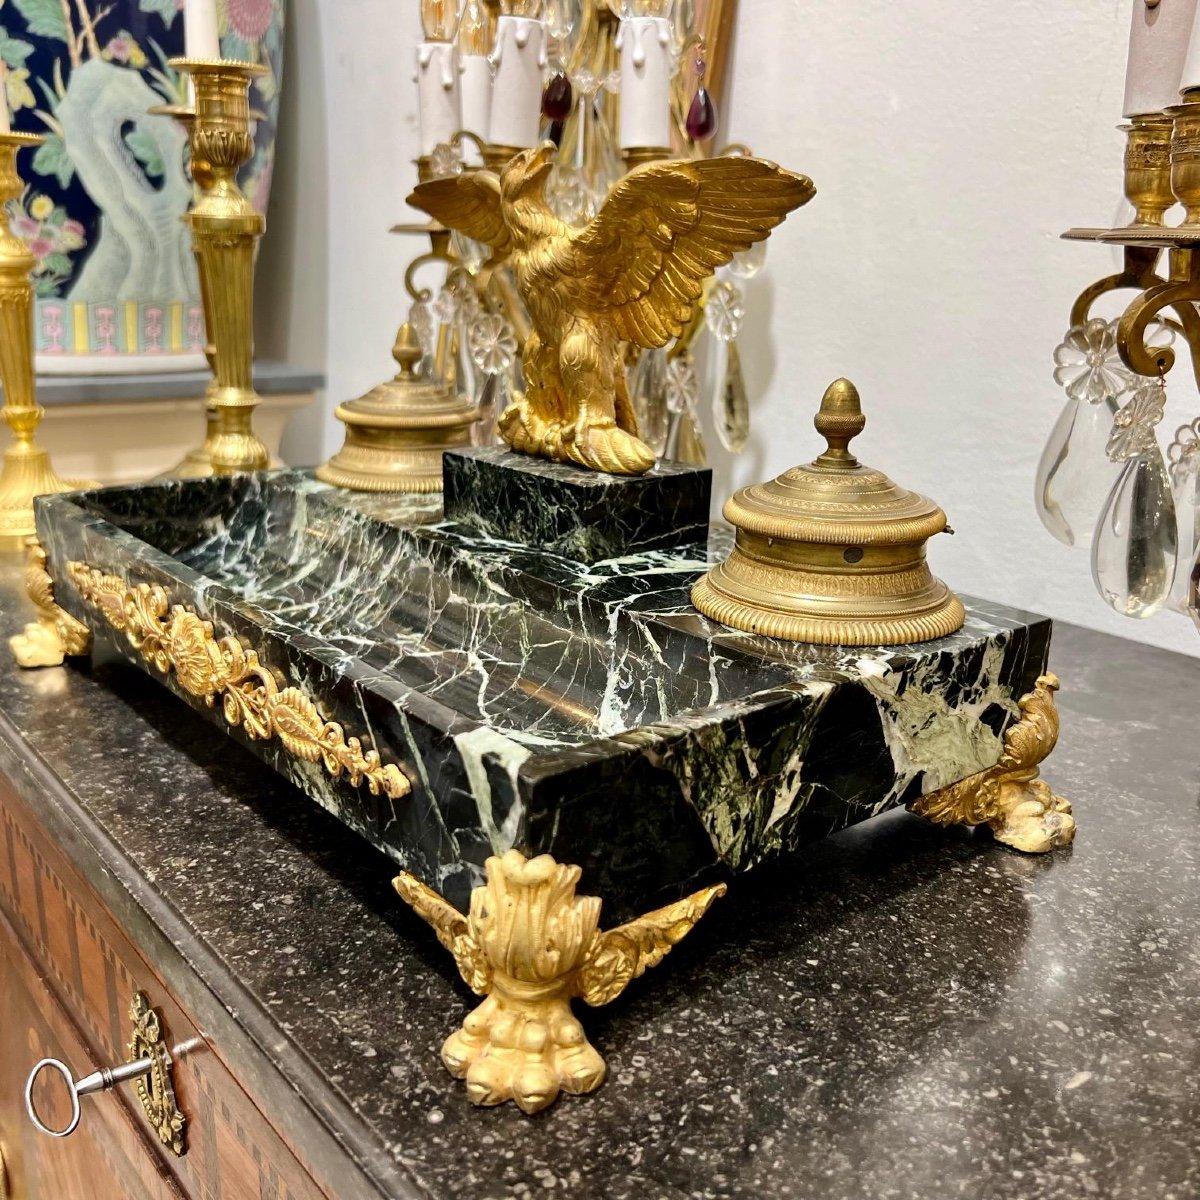 We would like to present you with this magnificent 19th-century Empire-style inkwell from the Napoleon III era adorned with a raised imperial eagle motif positioned between the two inkwells held in gilt bronze holders. The Portoro marble, one of the